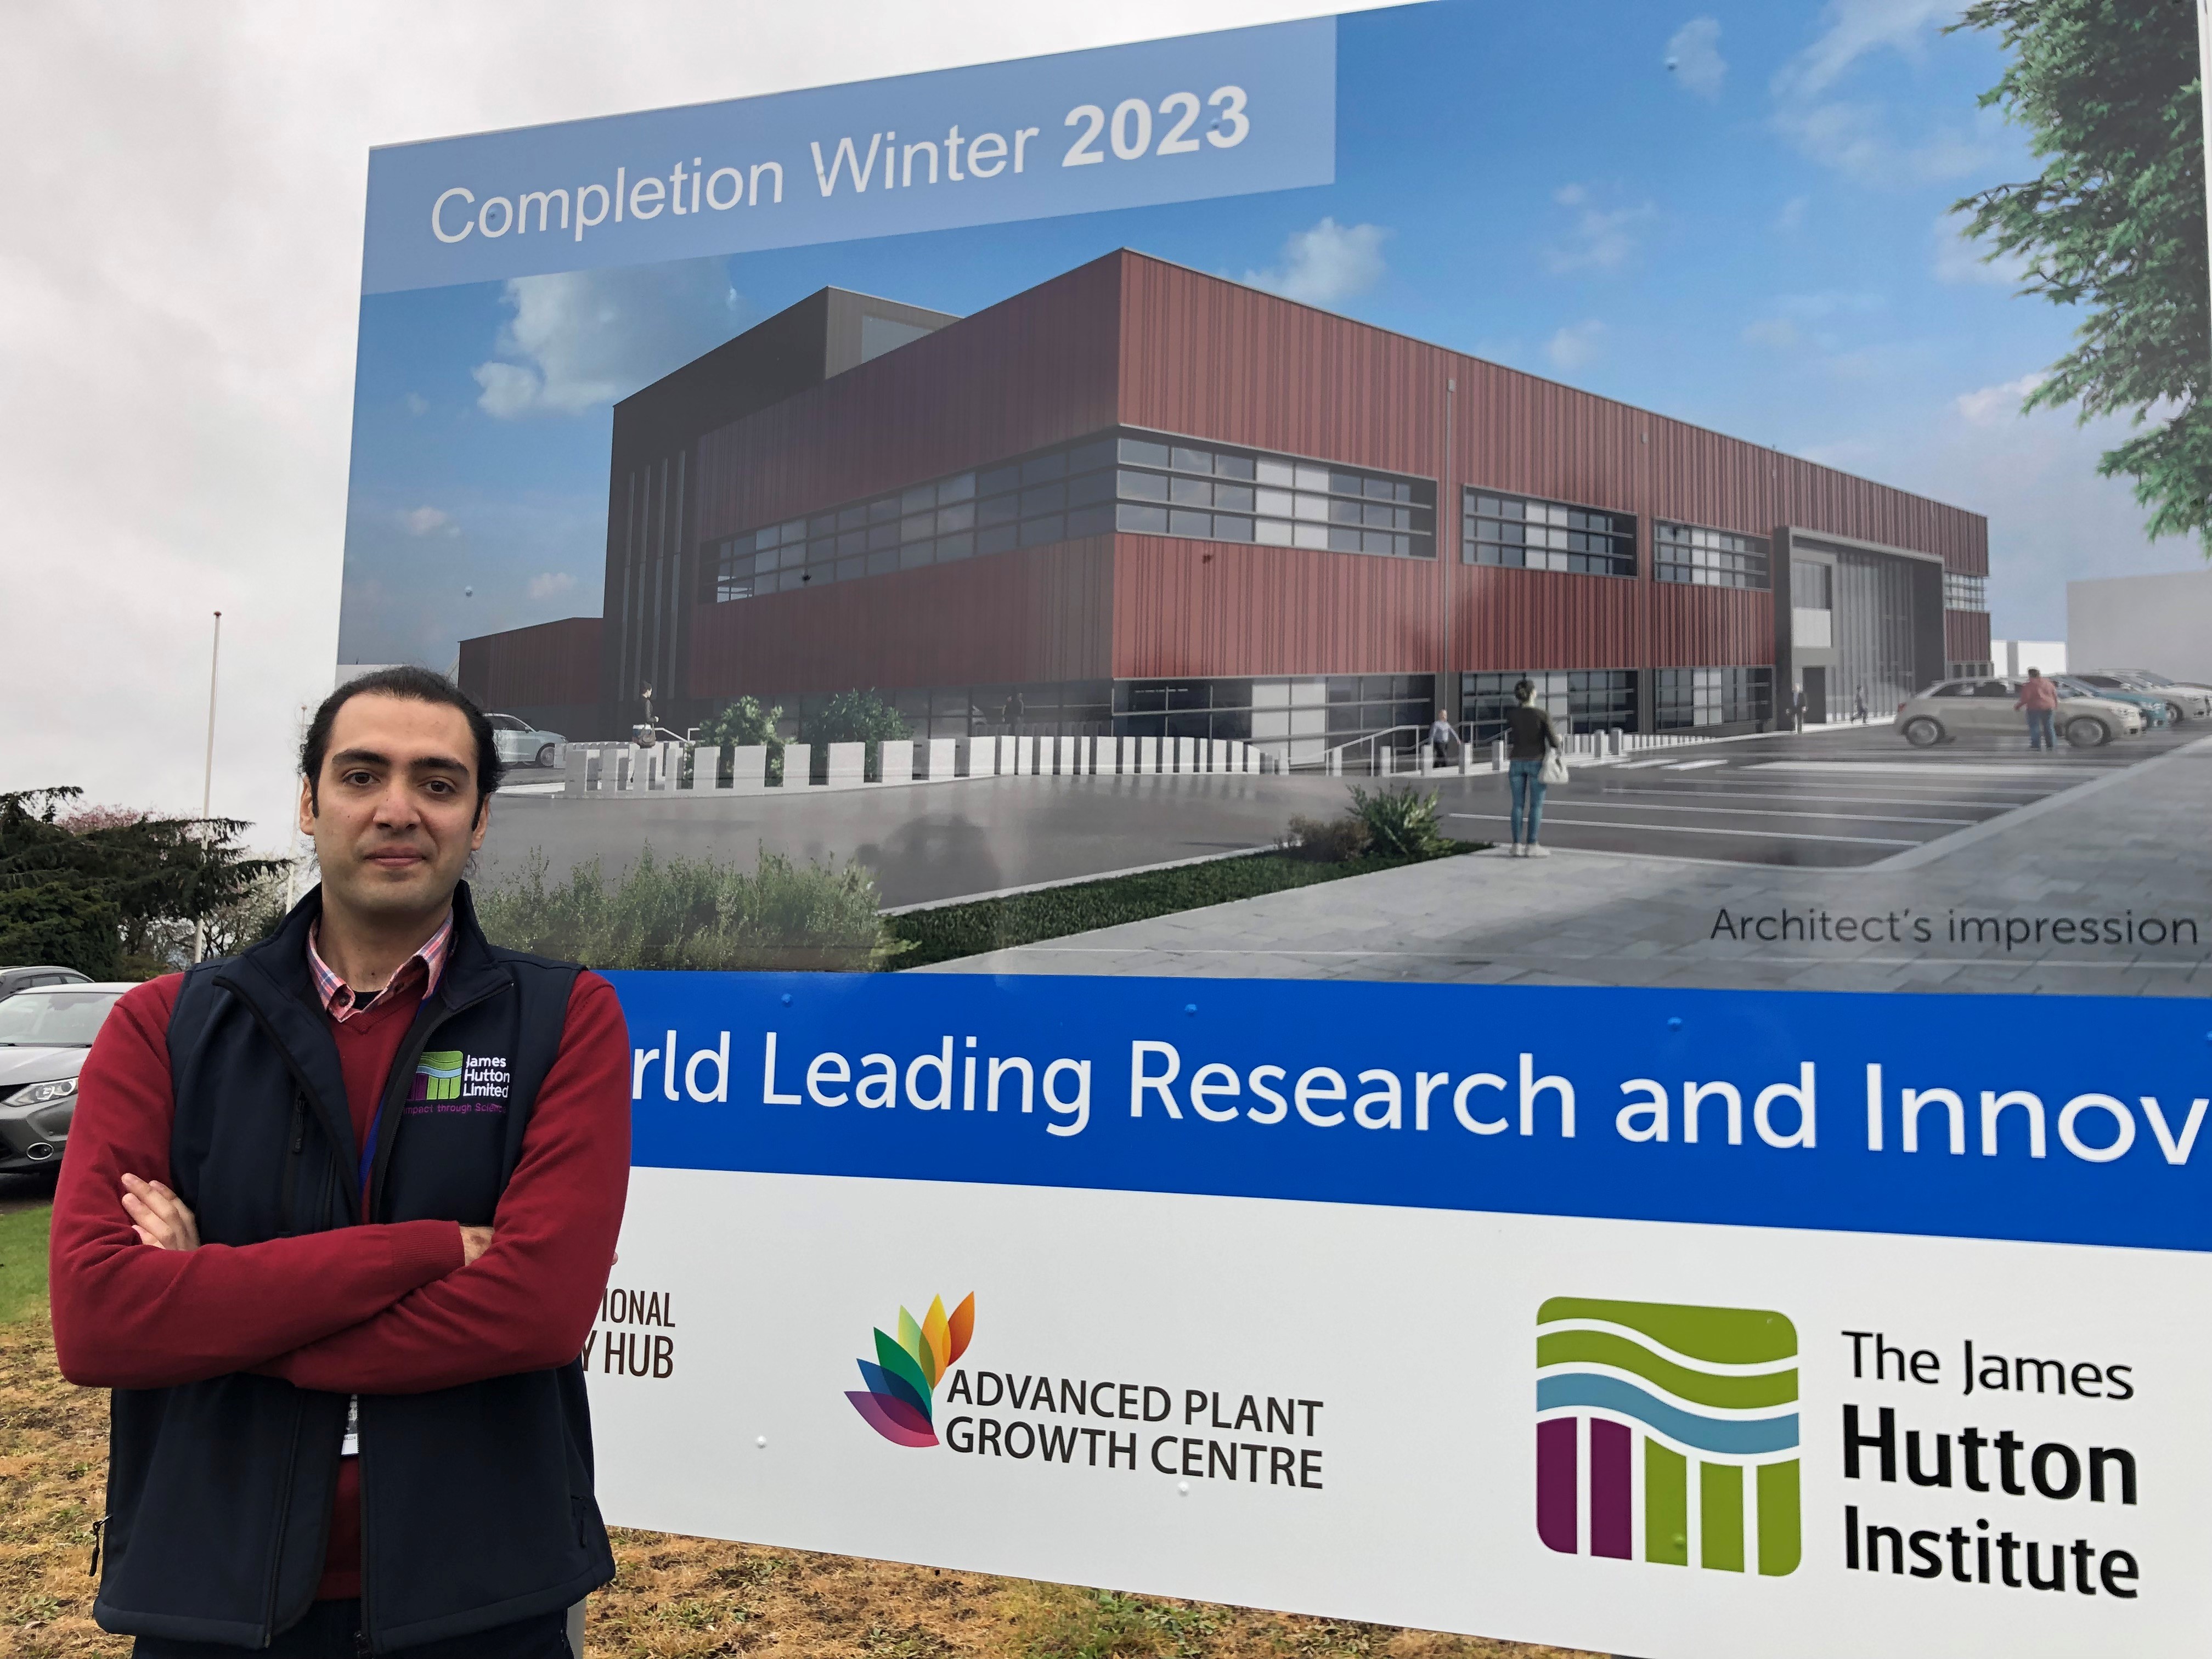 Ramin Ebrahimnejad joins James Hutton Limited as Business Development Manager for the Advanced Plant Growth Centre